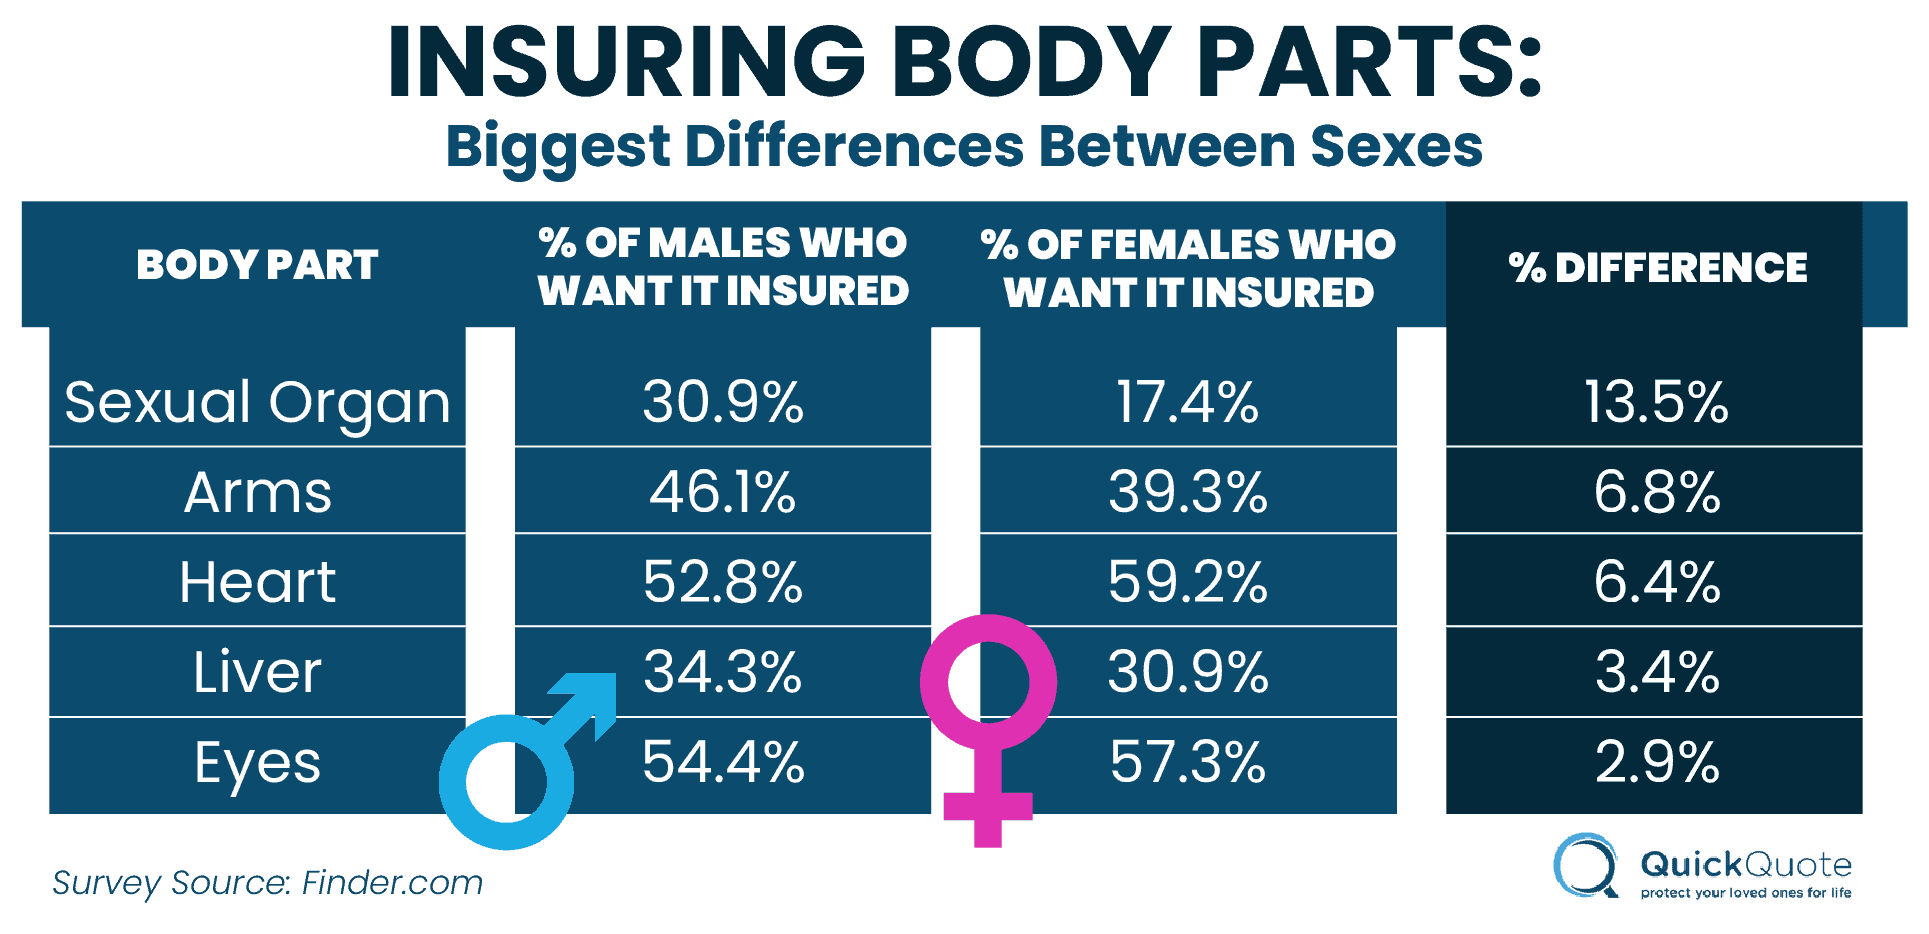 Body Part Insurance - Biggest Differences Between the Sexes